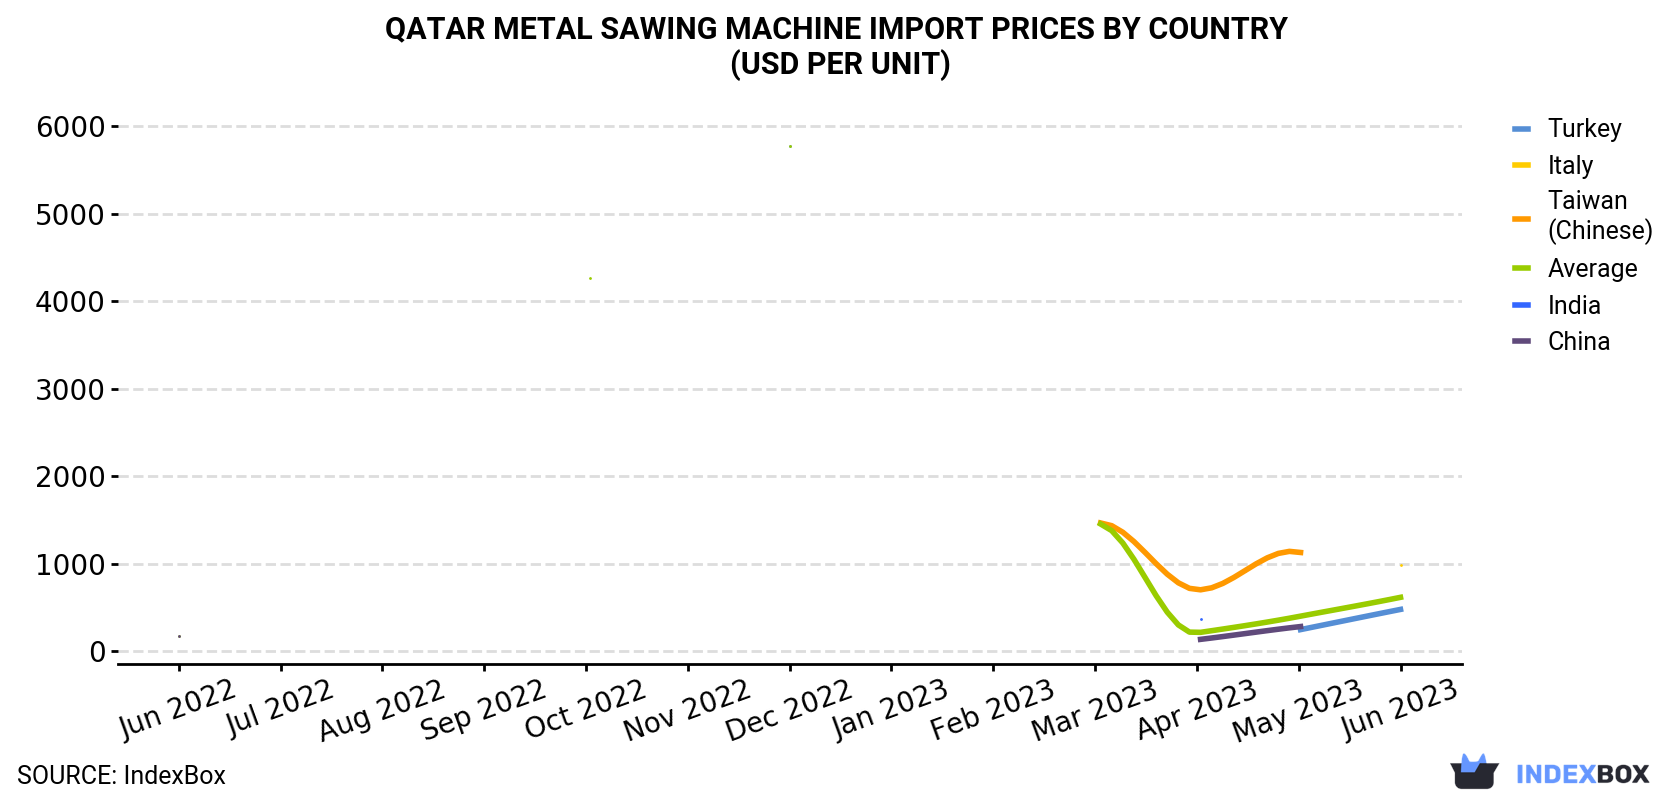 Qatar Metal Sawing Machine Import Prices By Country (USD Per Unit)